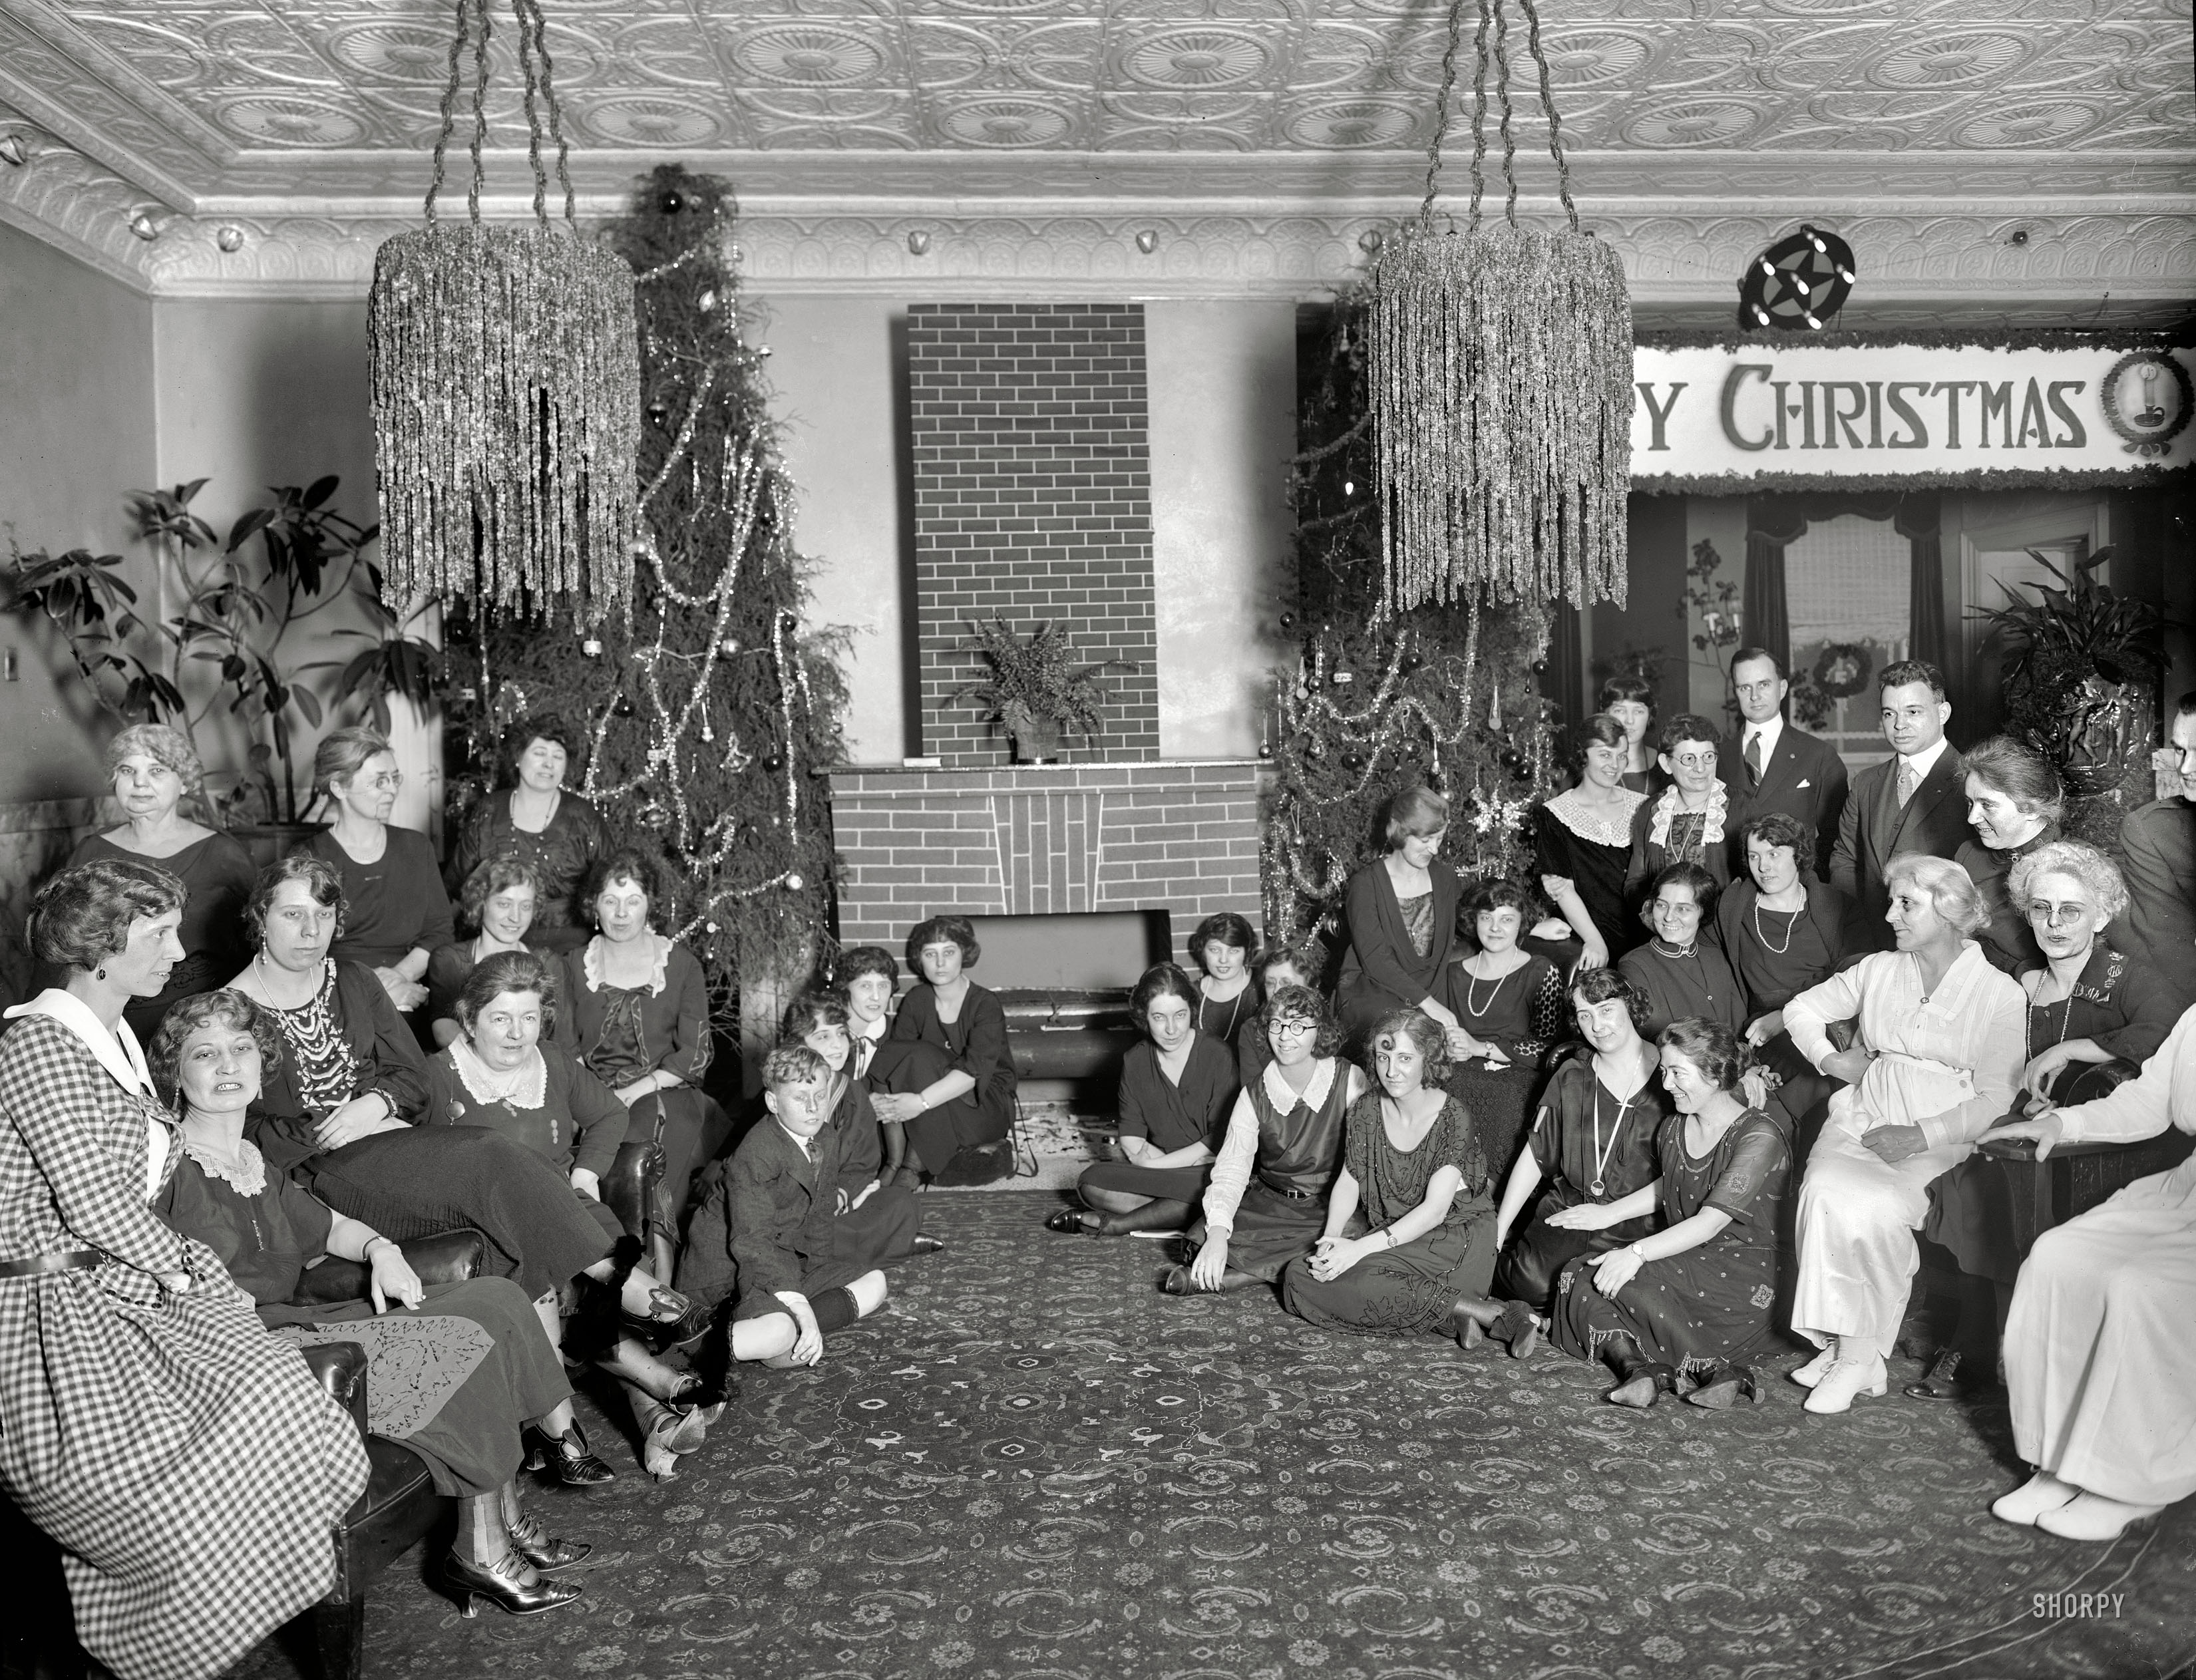 Washington, D.C., circa 1921. "Salvation Army Christmas group." Happy faces bathed in the flattering glow of the magnesium flash. View full size.